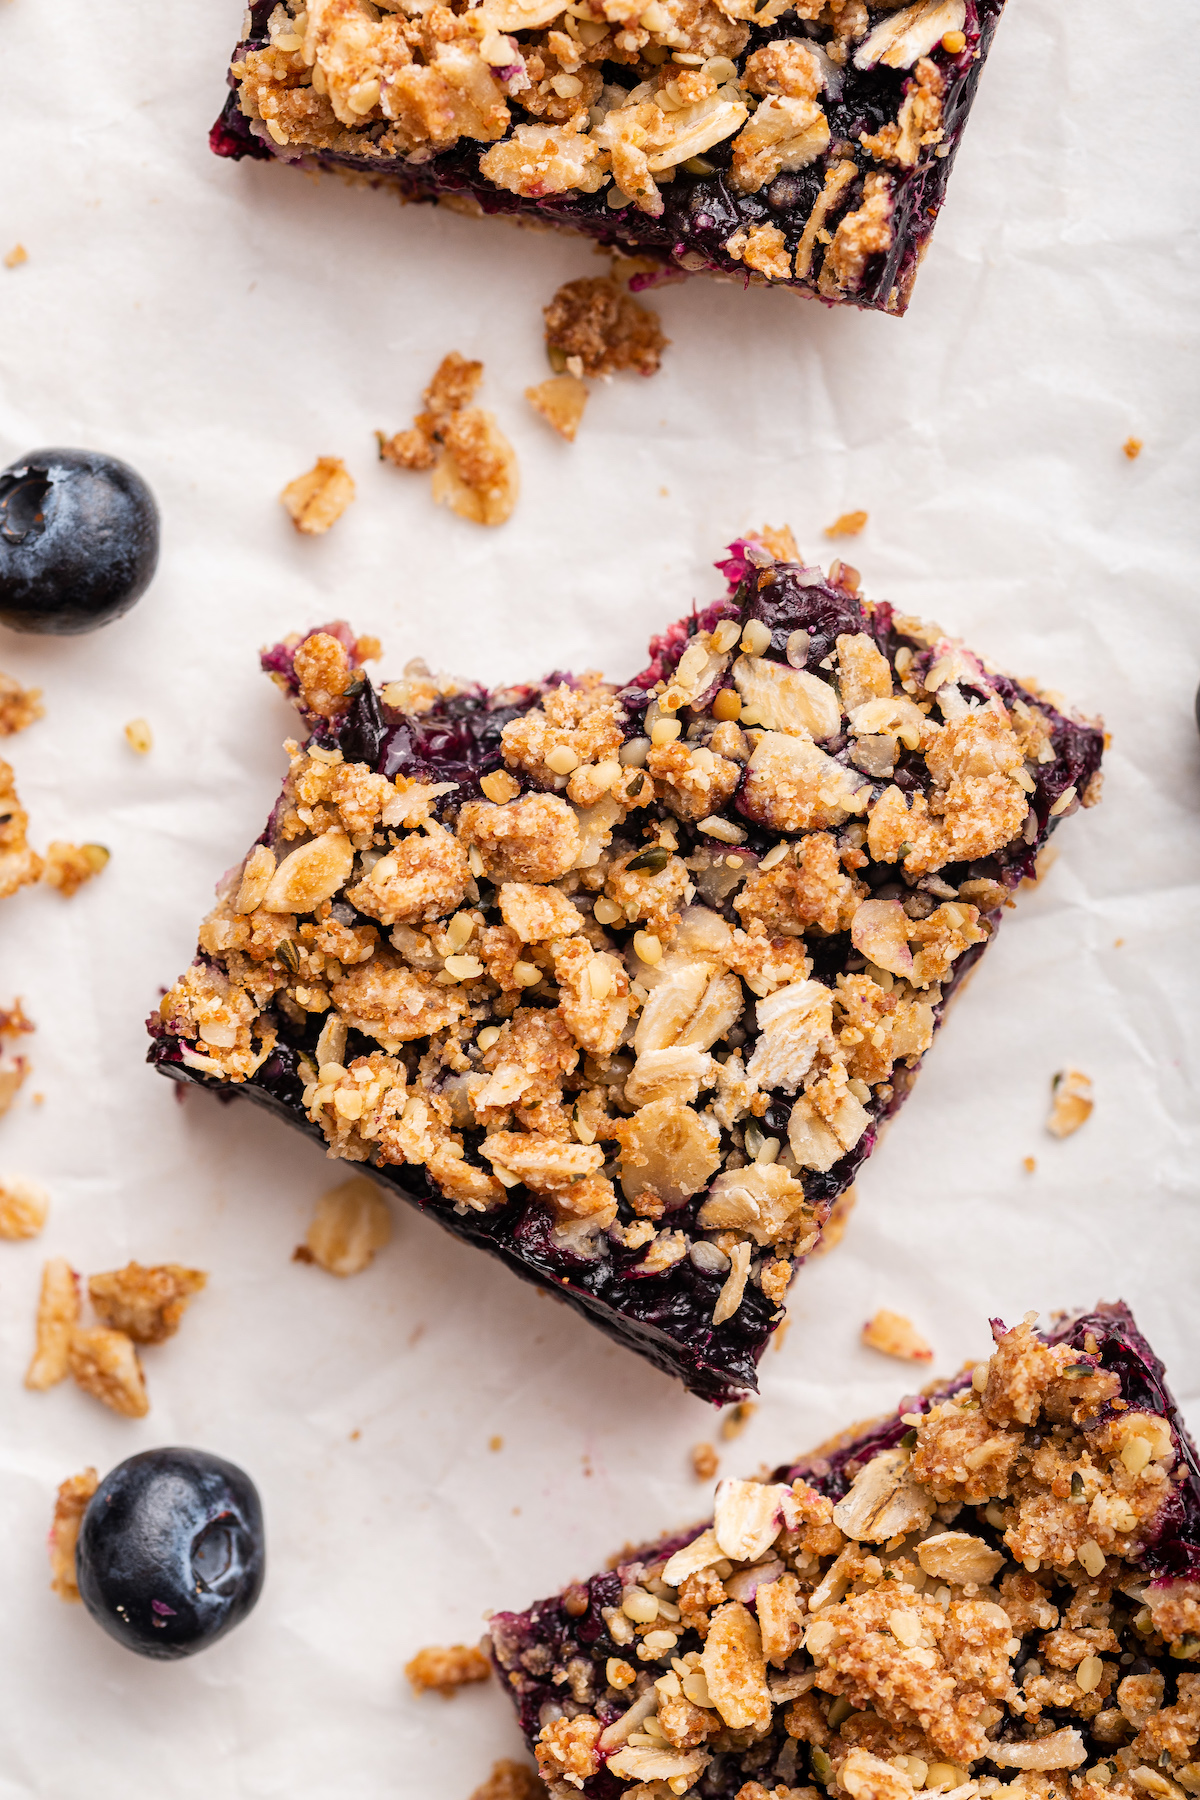 A blueberry crumble bar with a bite taken from it.